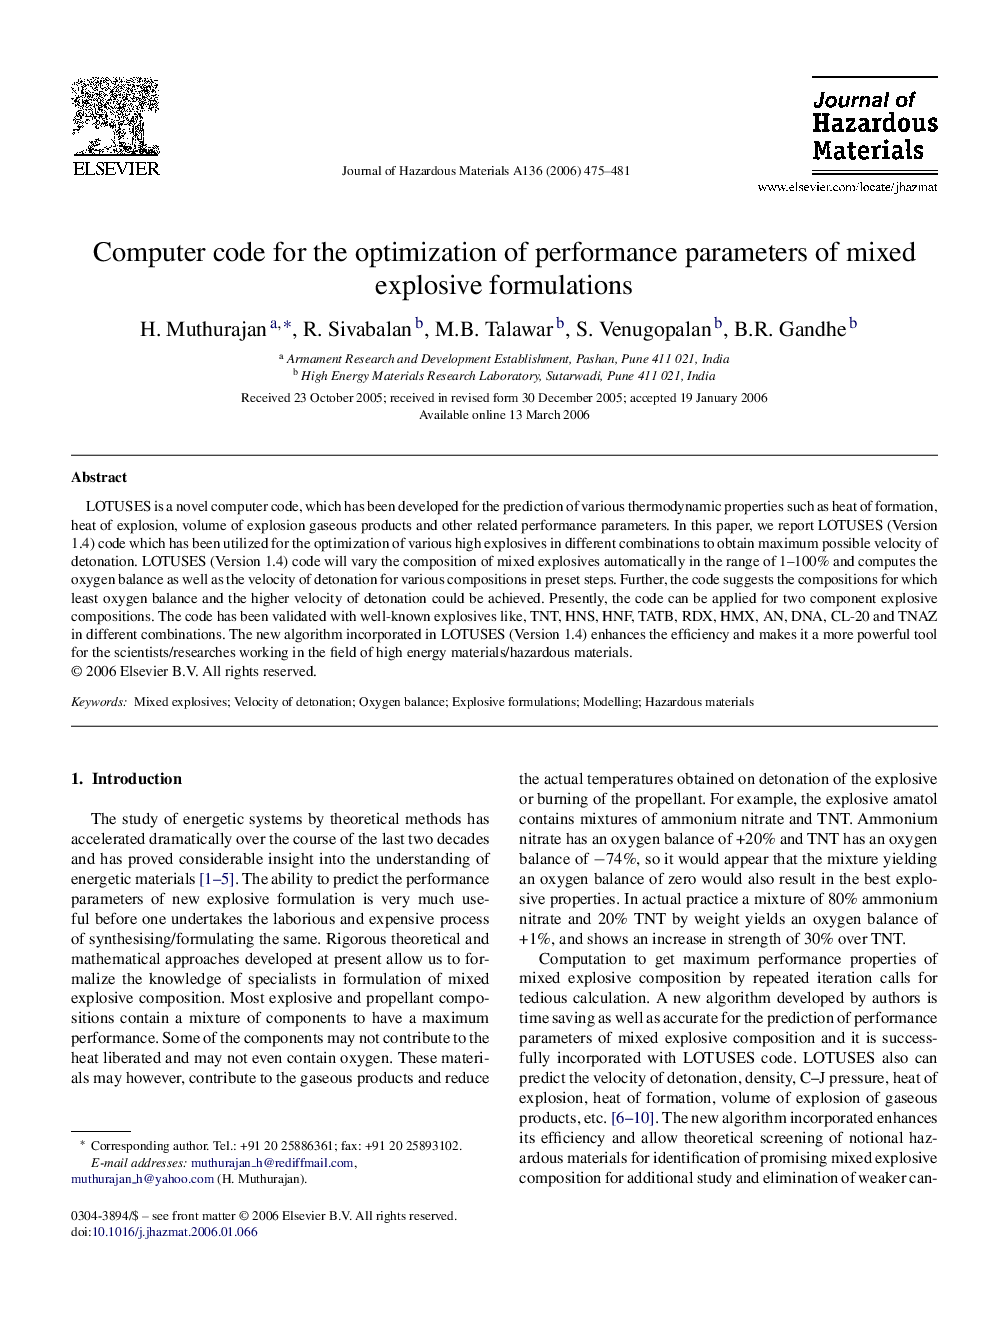 Computer code for the optimization of performance parameters of mixed explosive formulations